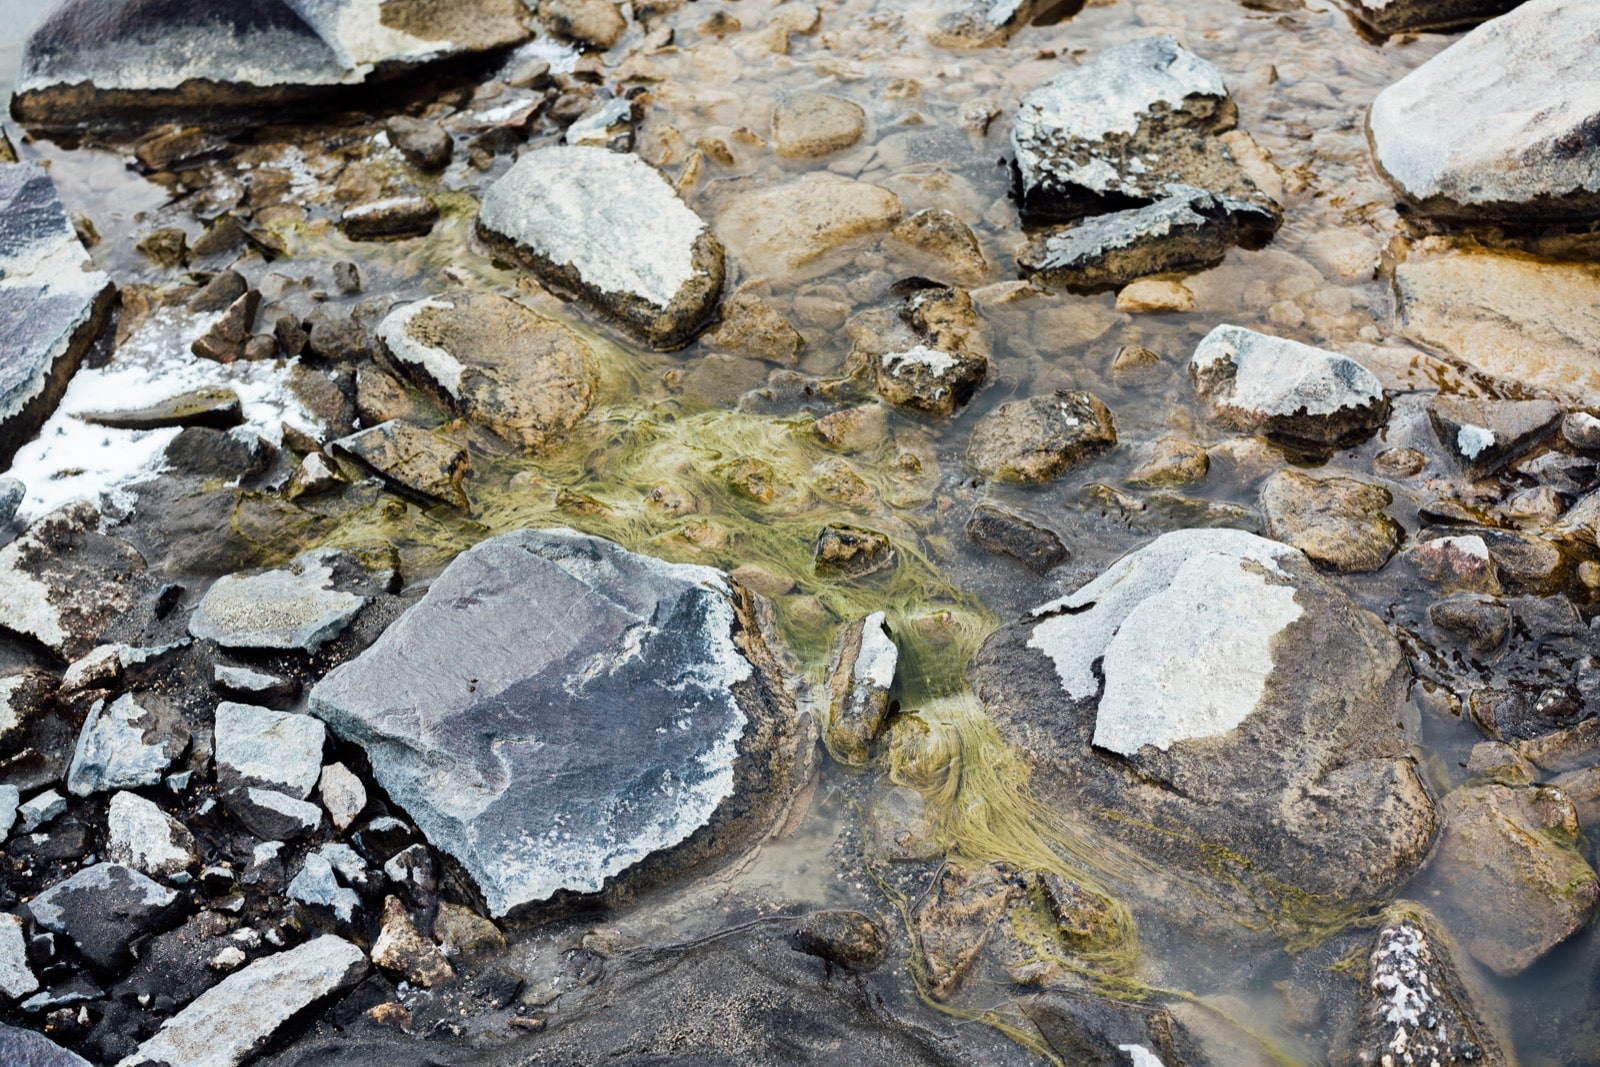  green filamentous algae piled up in shallow water over rocks and some frost 